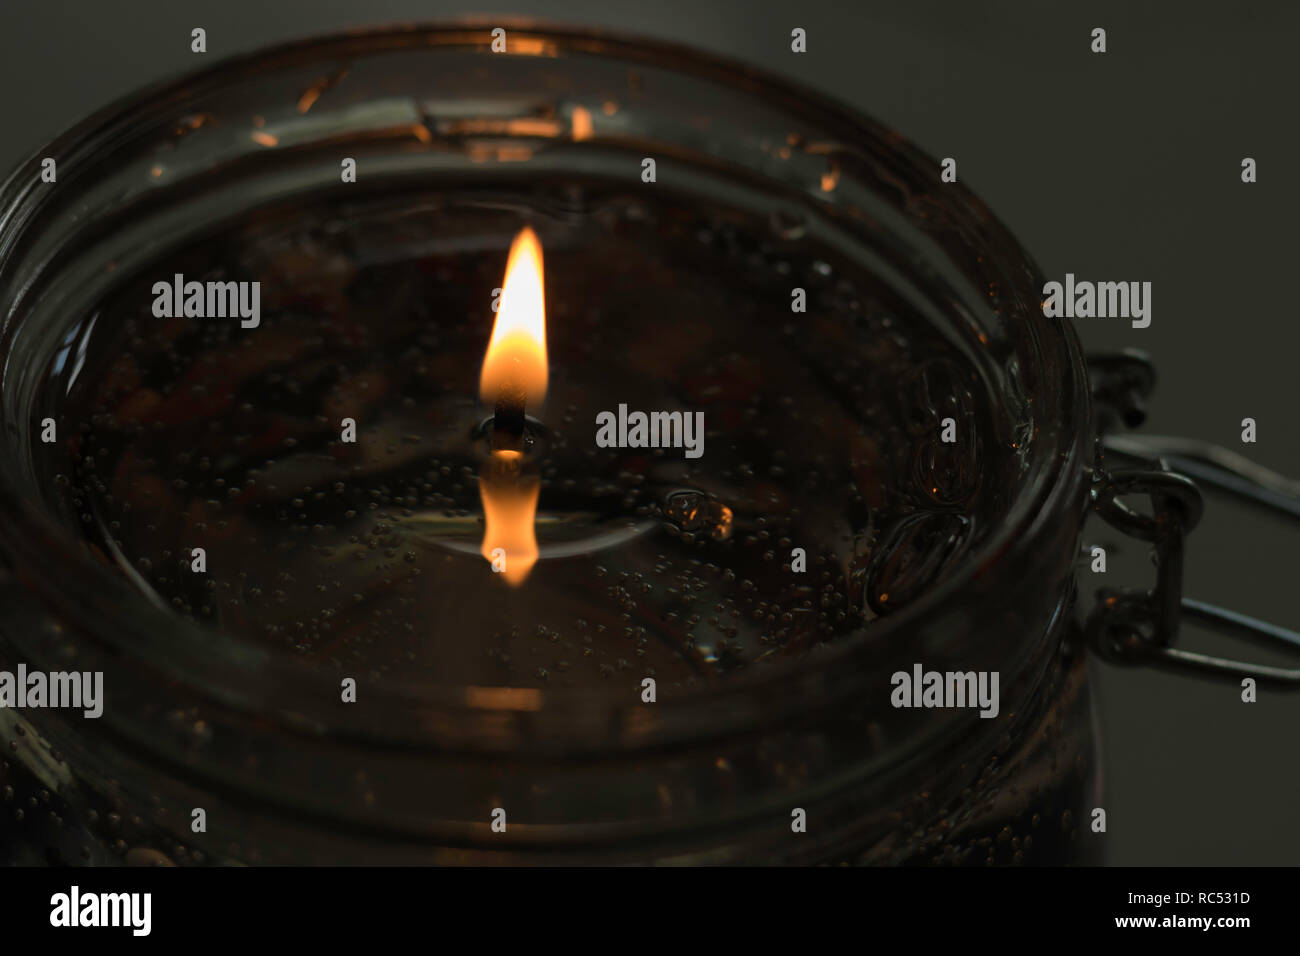 Burning Decorative Gel Candle, Shallow Depth of Field Stock Photo